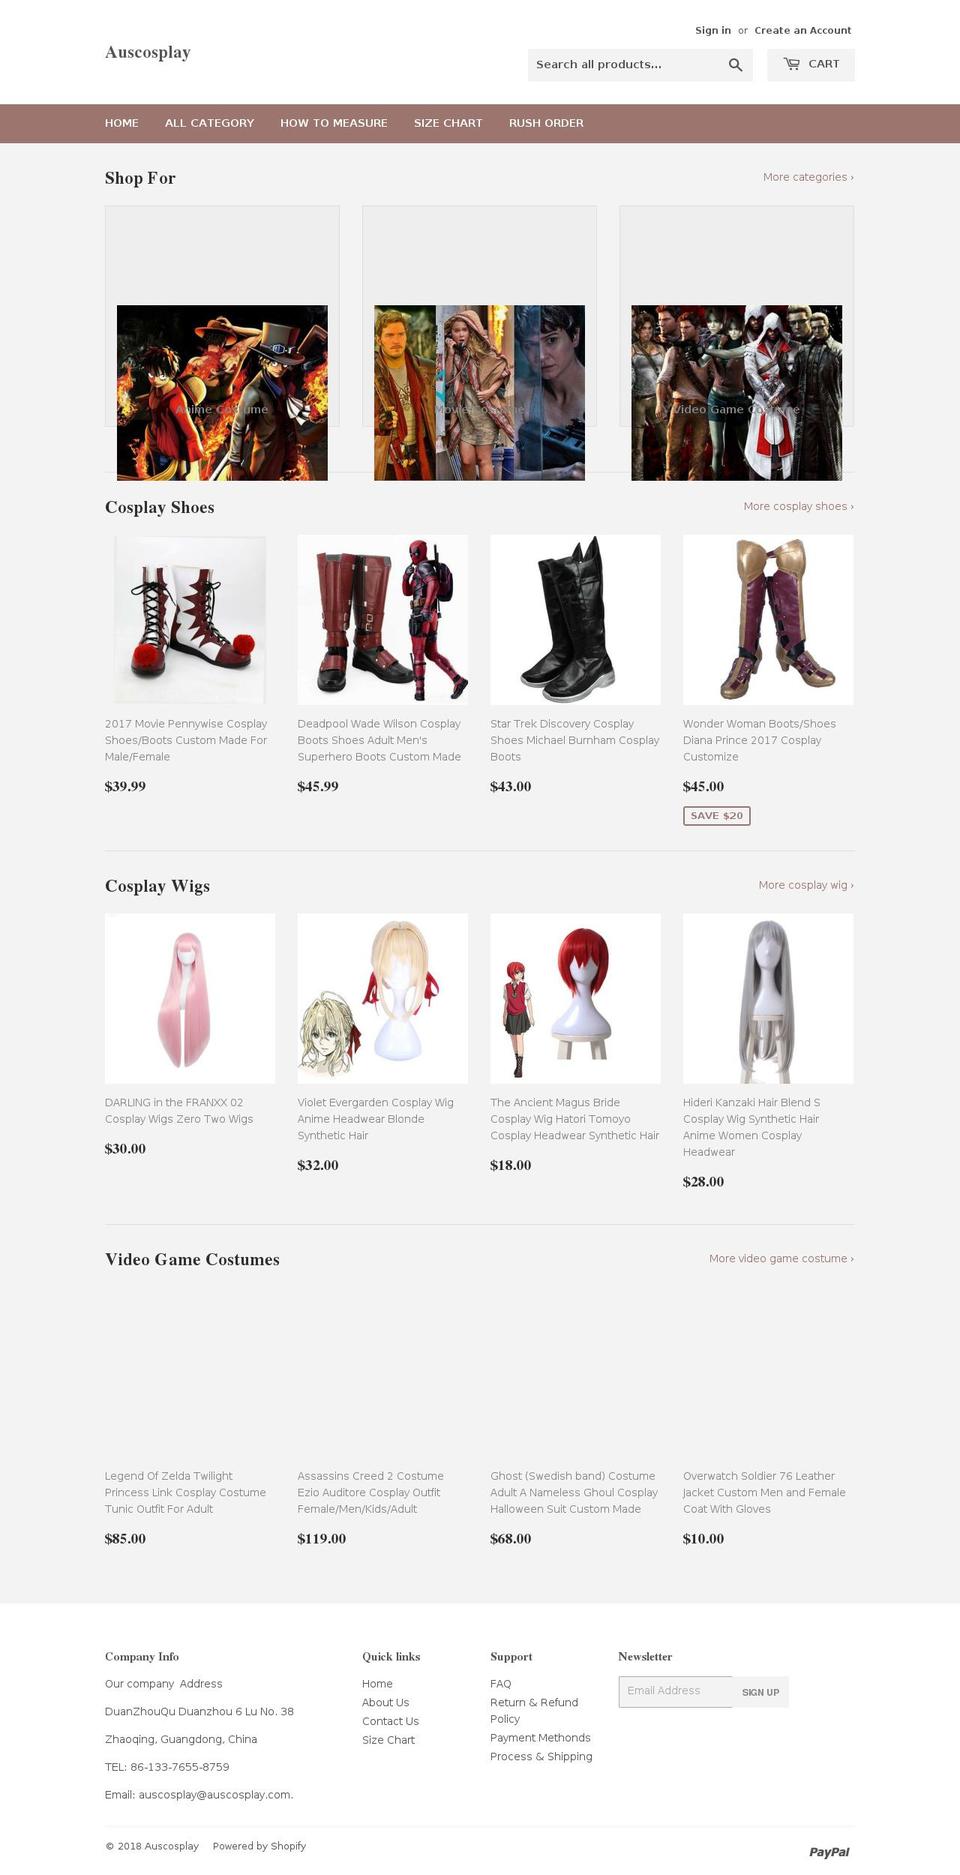 foxic Shopify theme site example auscosplay.com